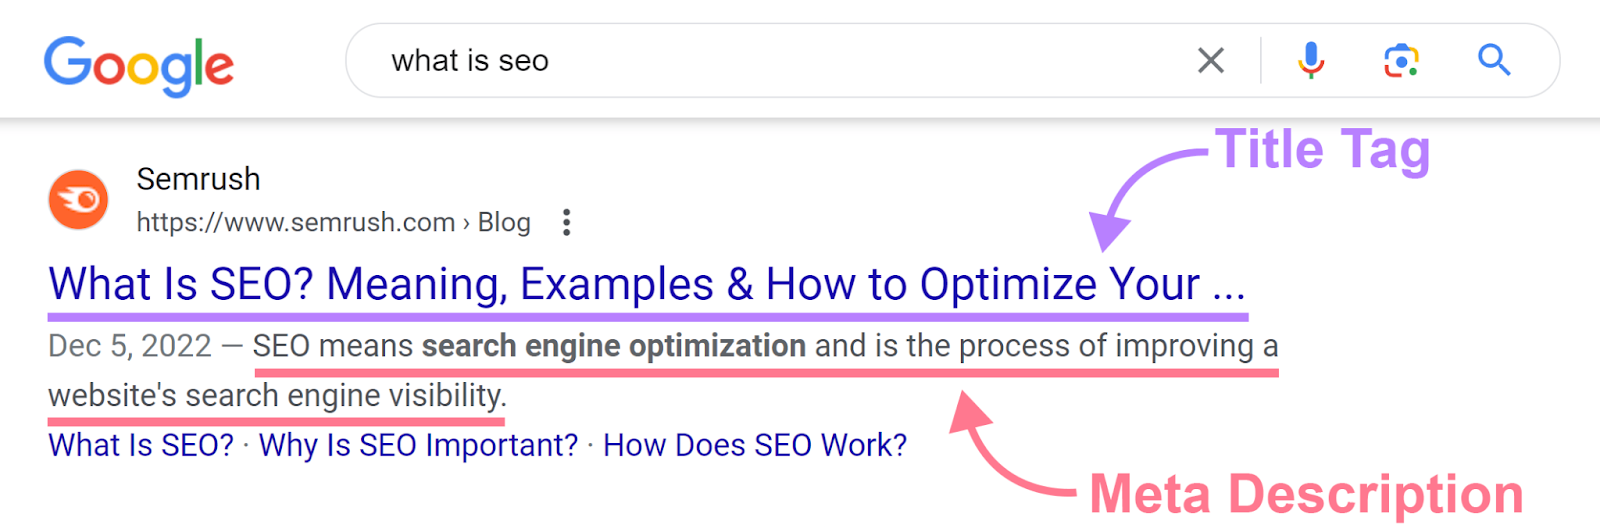 Google search result for 'what is seo' with title tag and meta description of result highlighted and annotated.